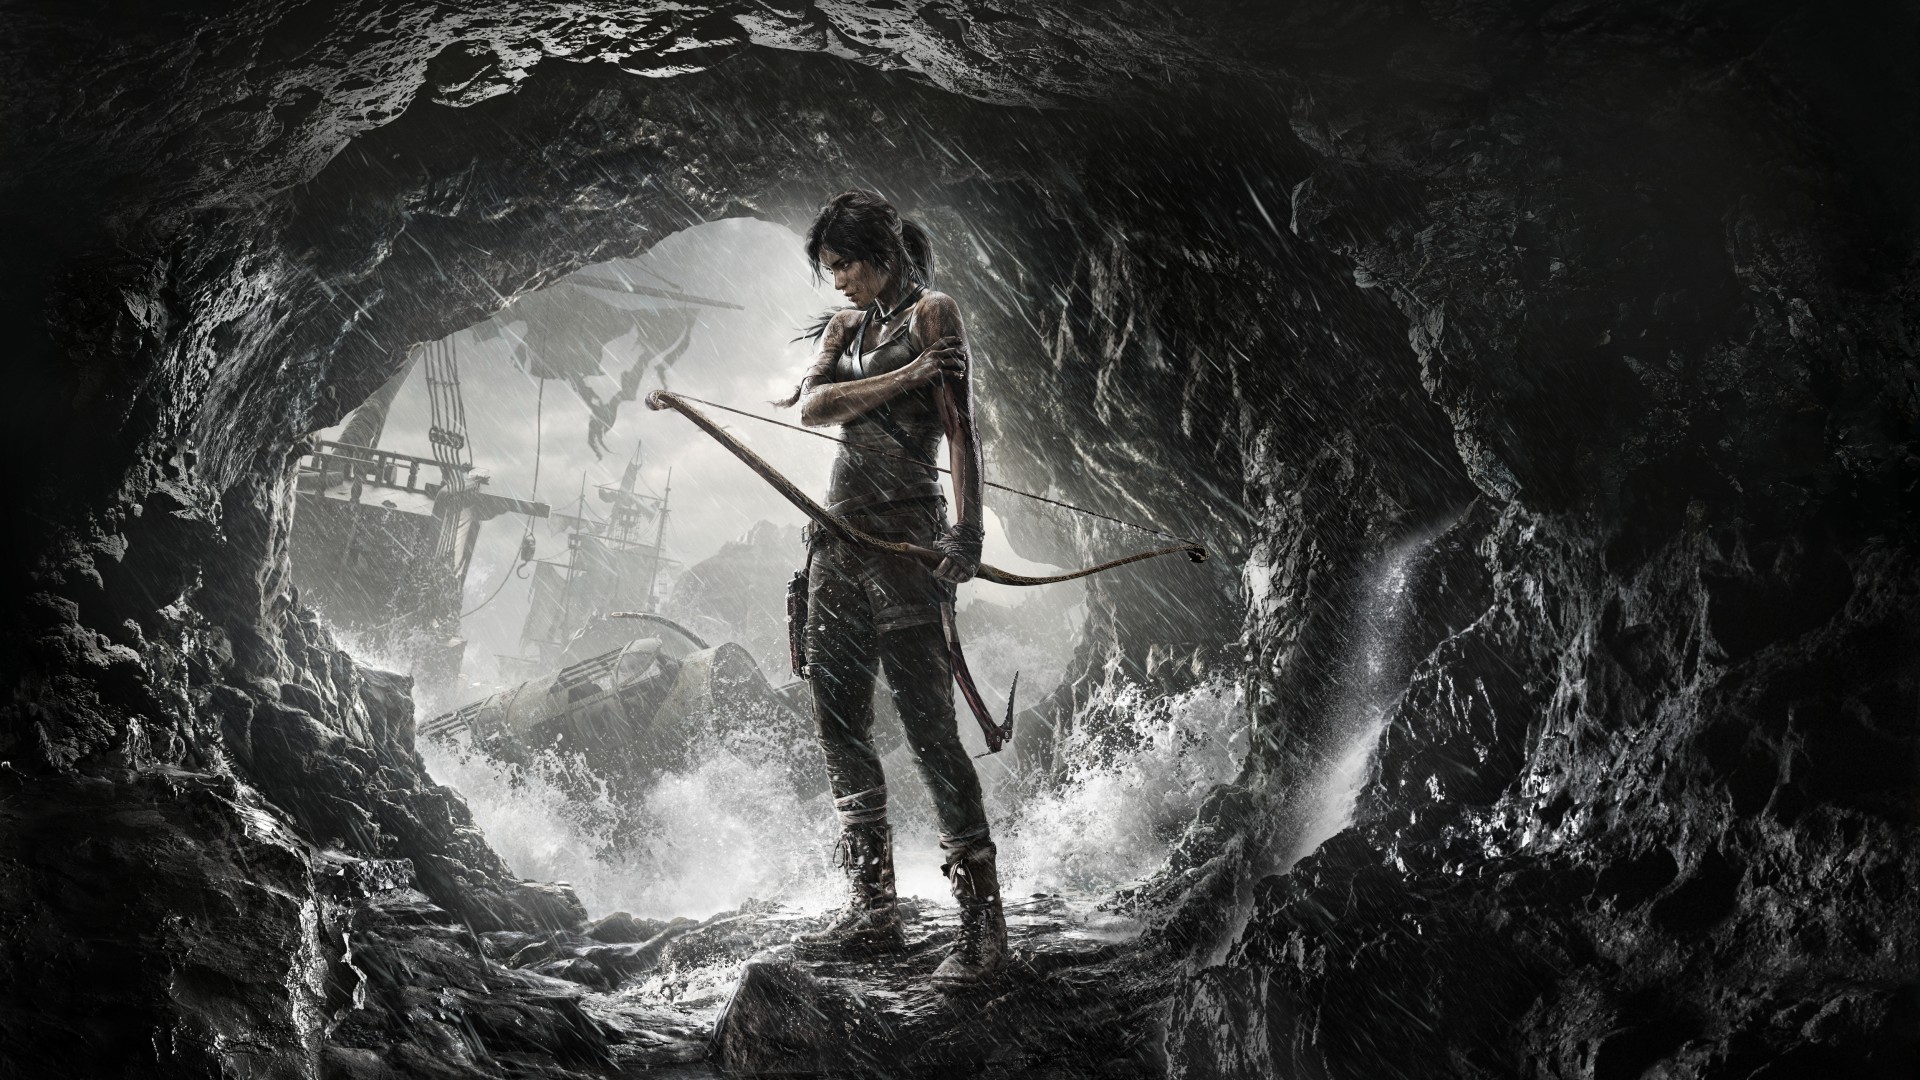 the Tomb Raider Wallpaper Games Adventure Rise of the Tomb Raider 1920x1080